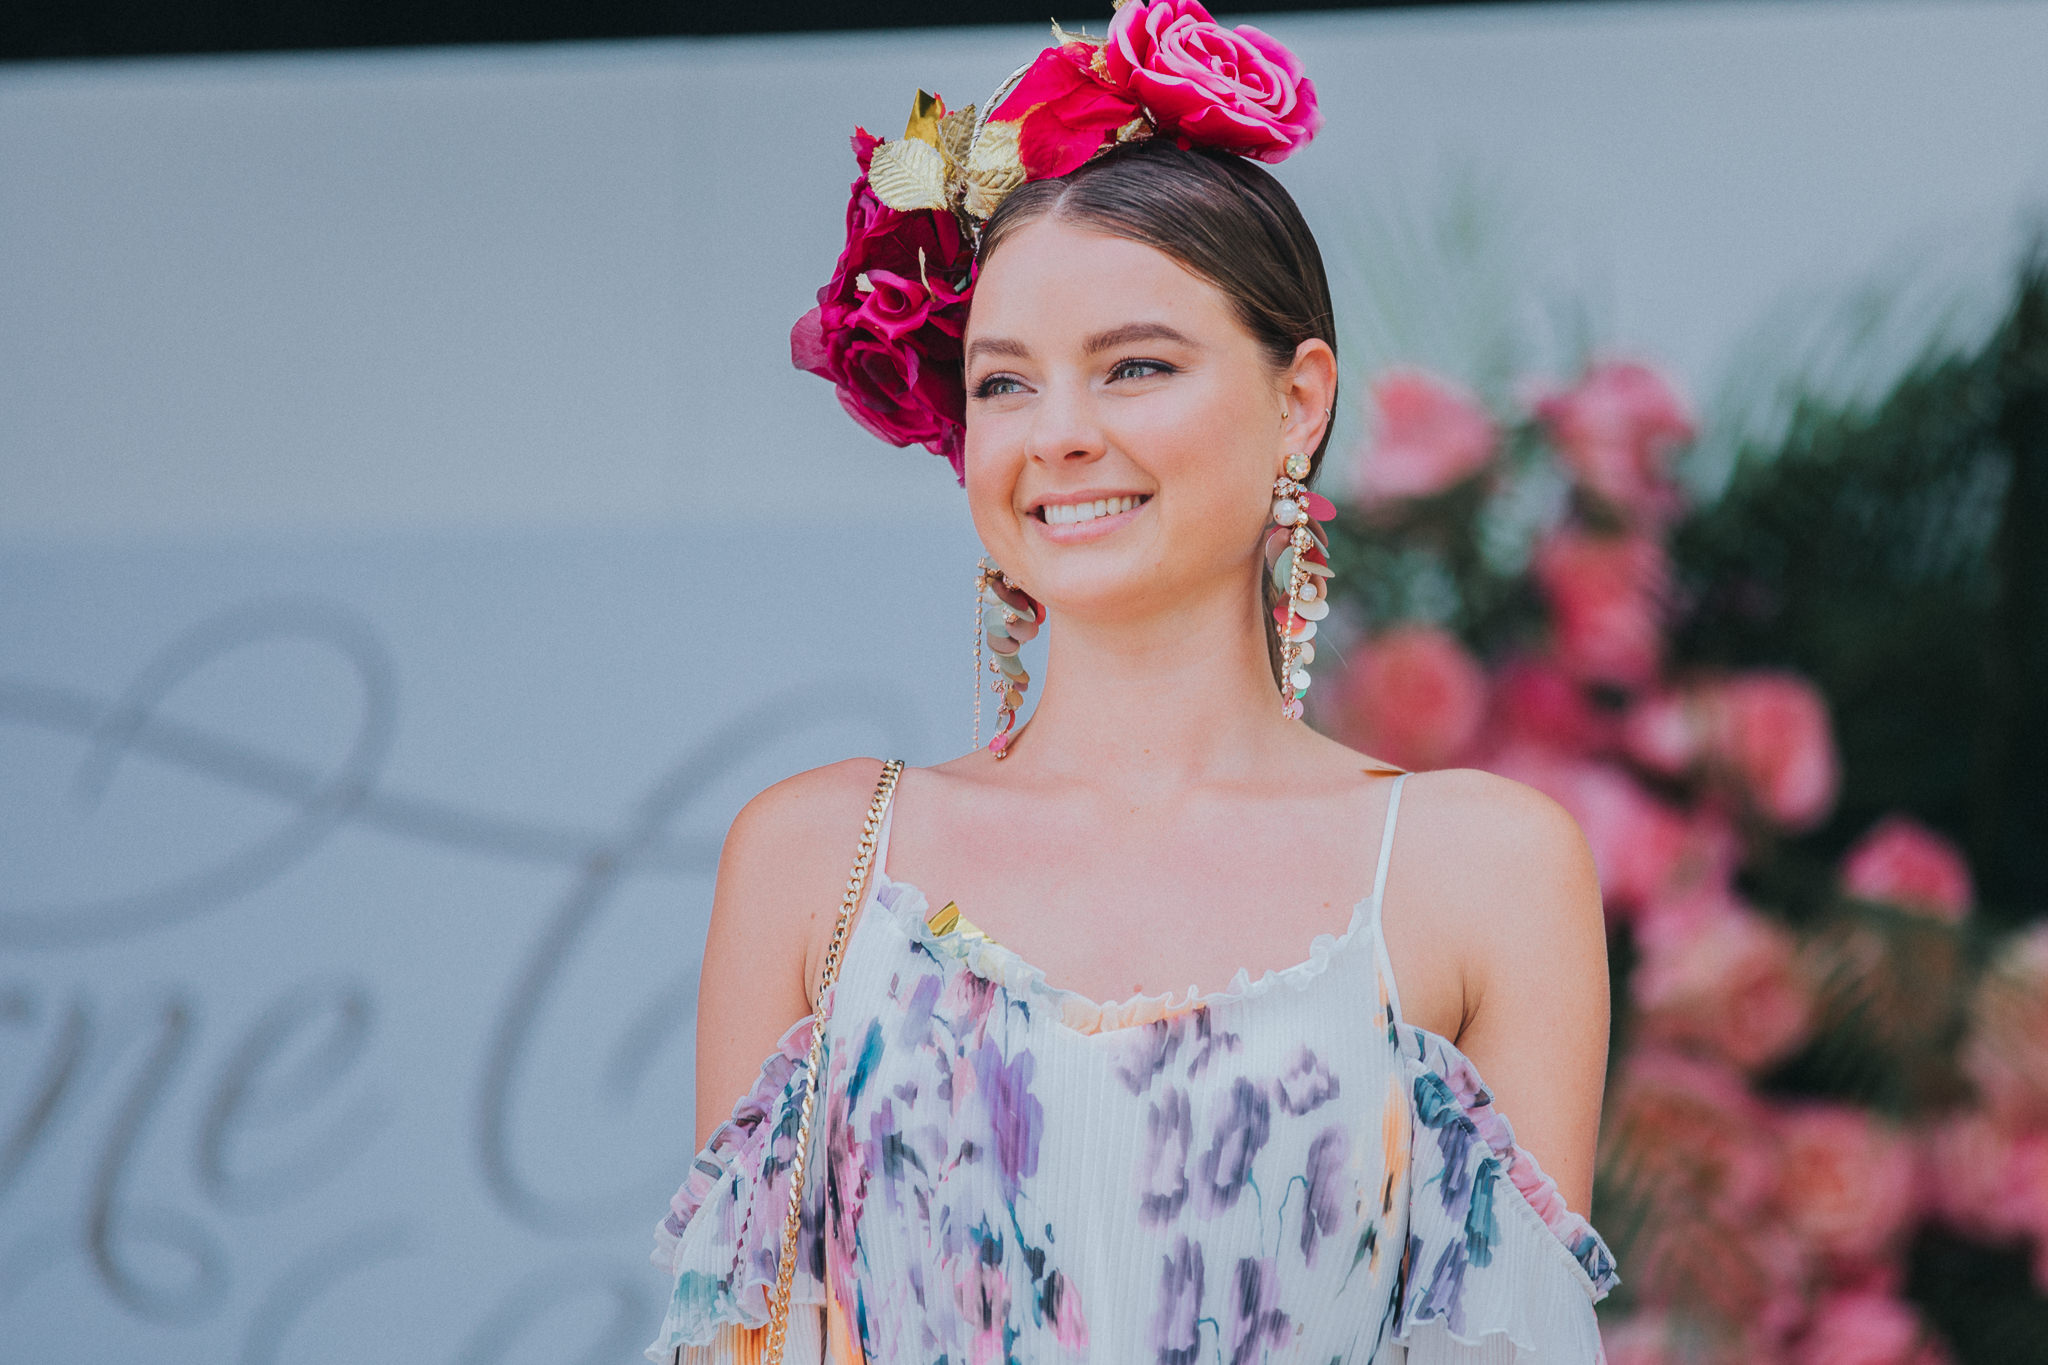 Model at the Melbourne Cup 2017